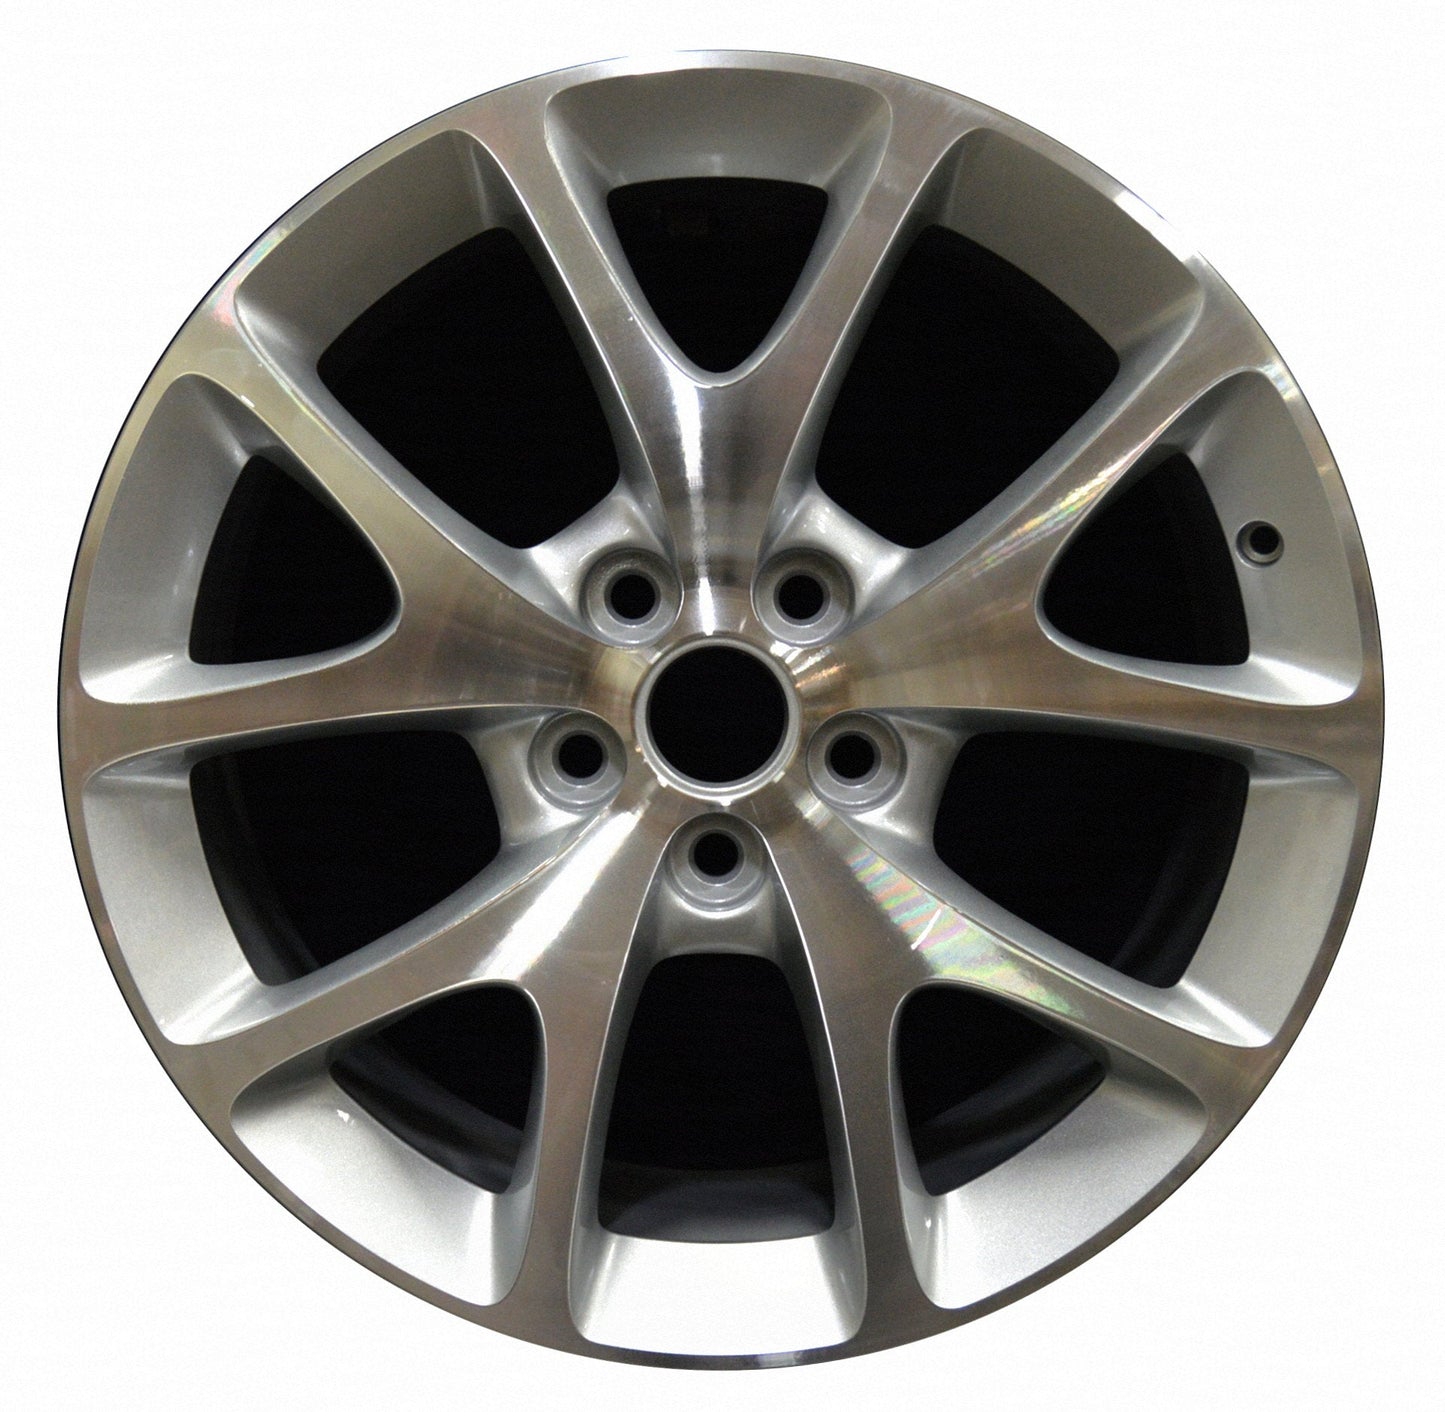 Buick Regal  2012, 2013, 2014, 2015, 2016, 2017 Factory OEM Car Wheel Size 19x8.5 Alloy WAO.4108.PS09.MABRT